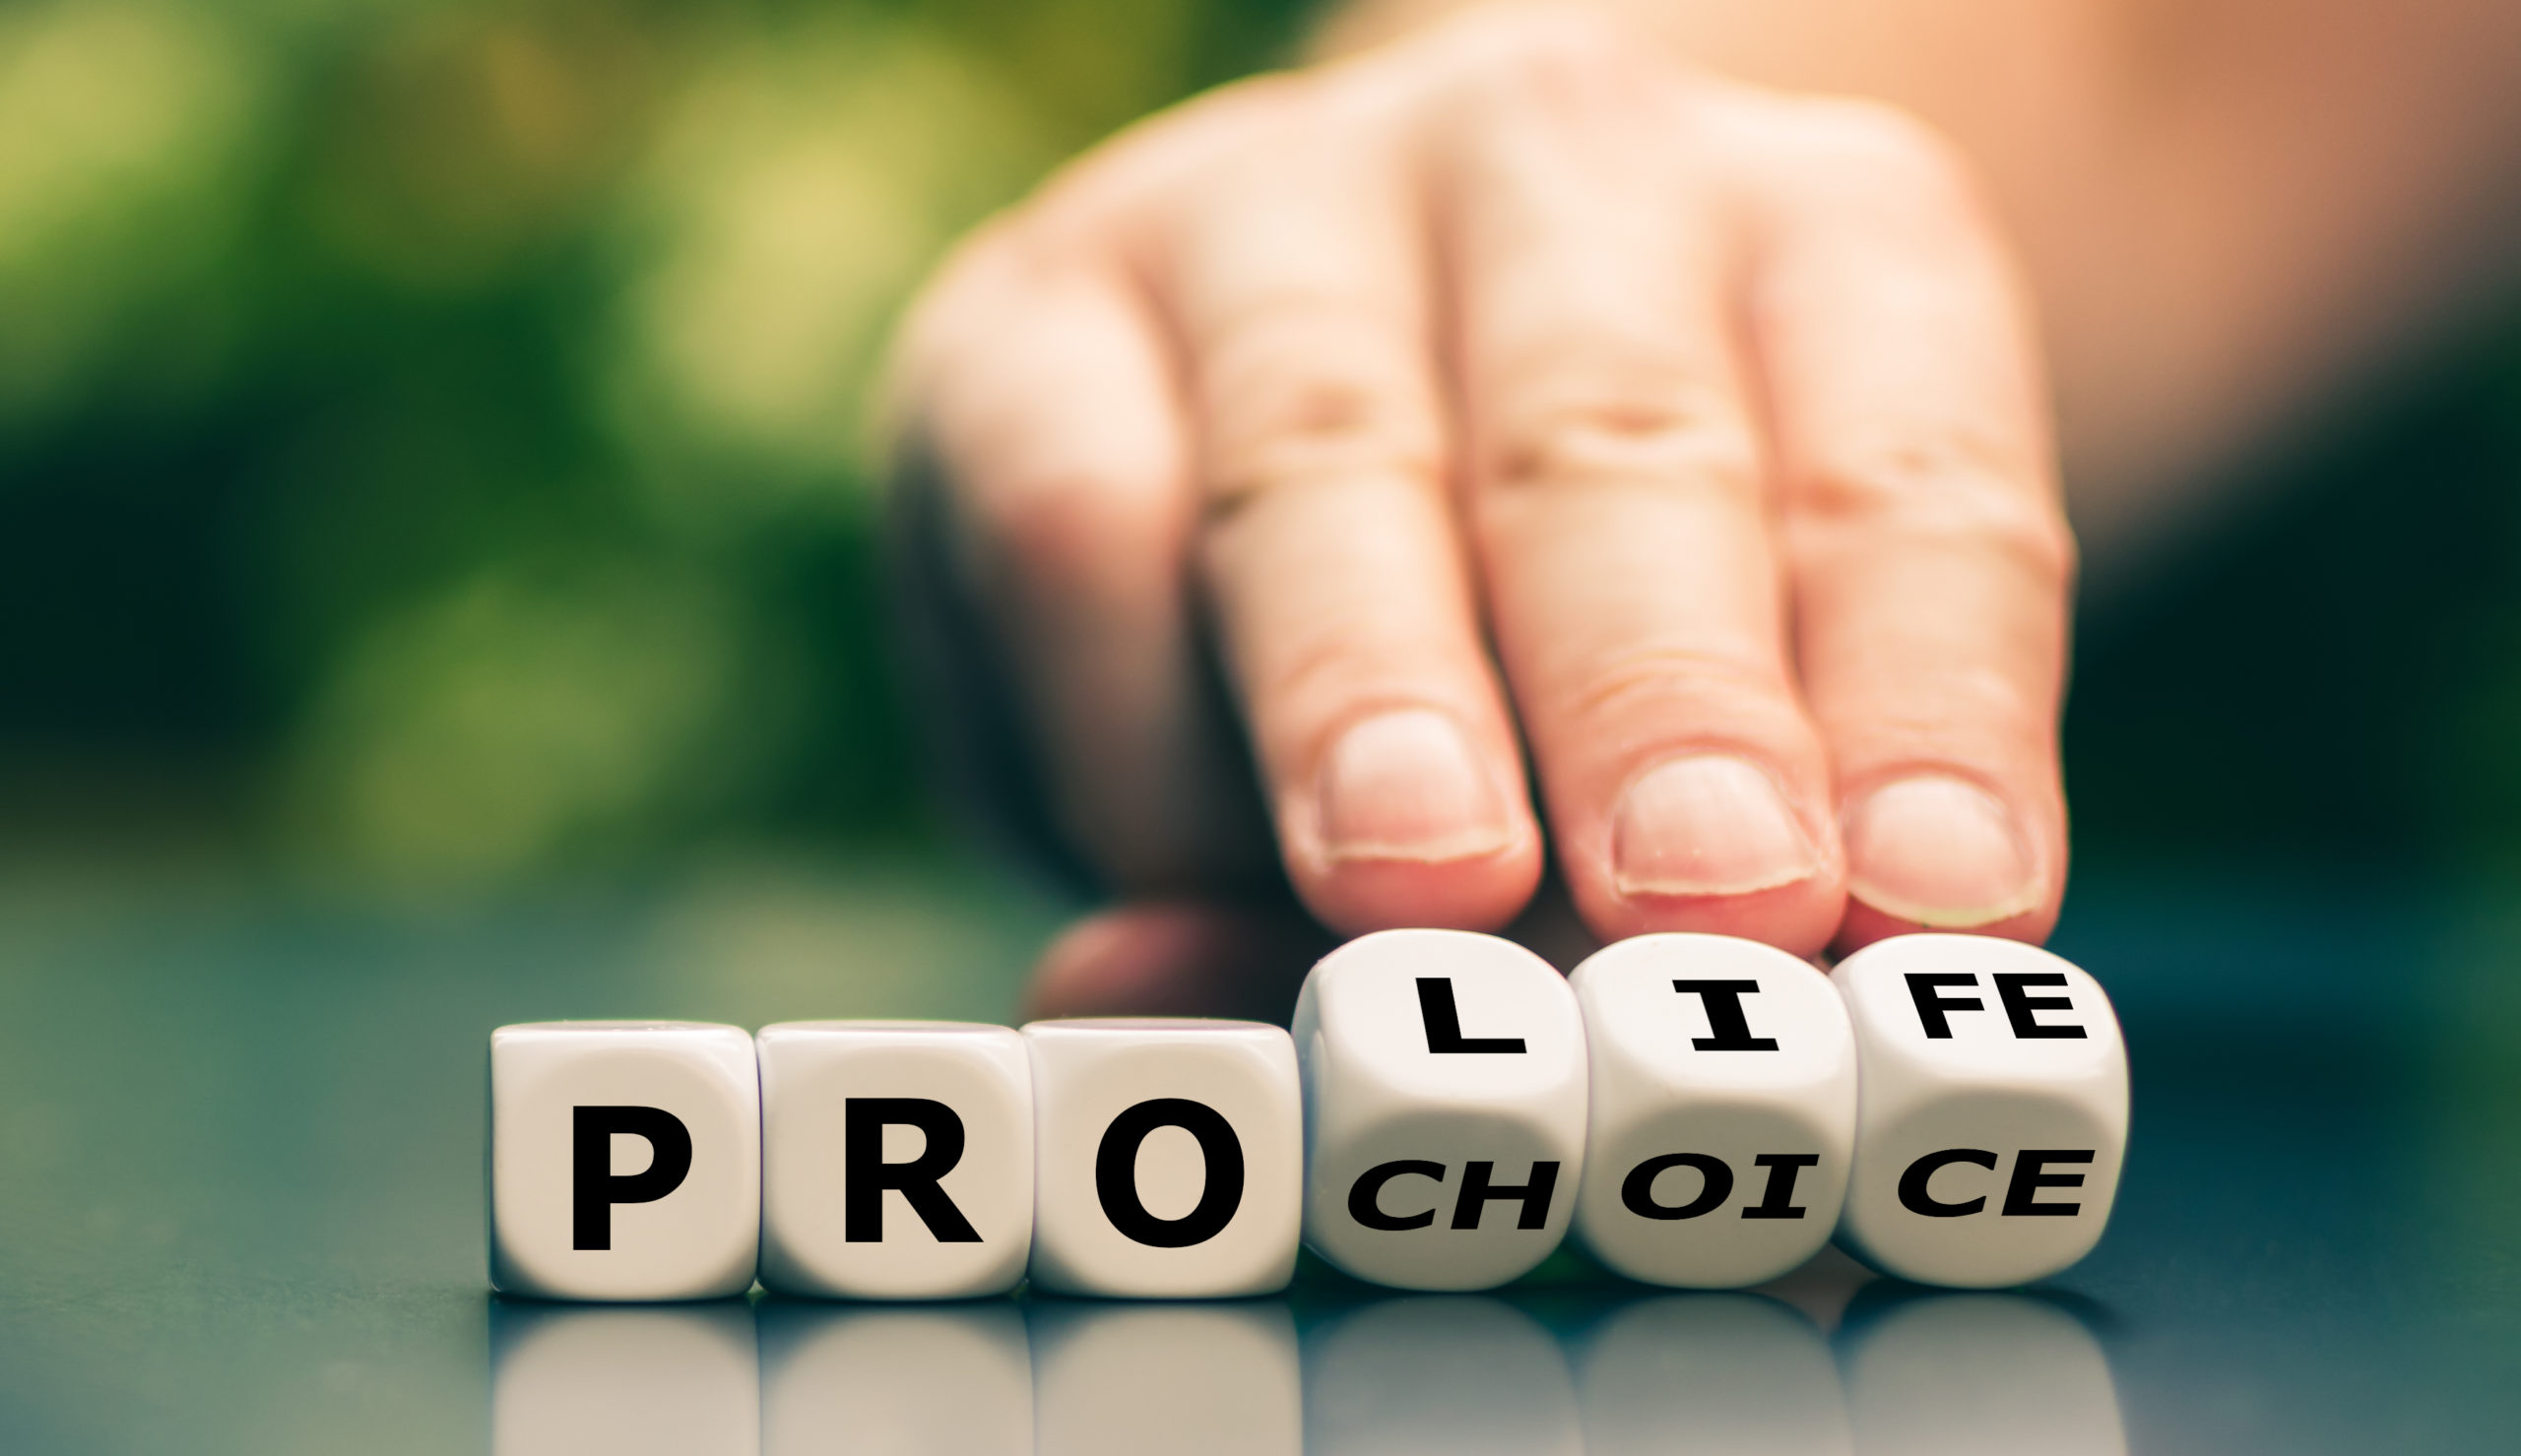 Six dice with the letters P R O L I F E C H O I C E they spell Pro Life and Pro Choice.